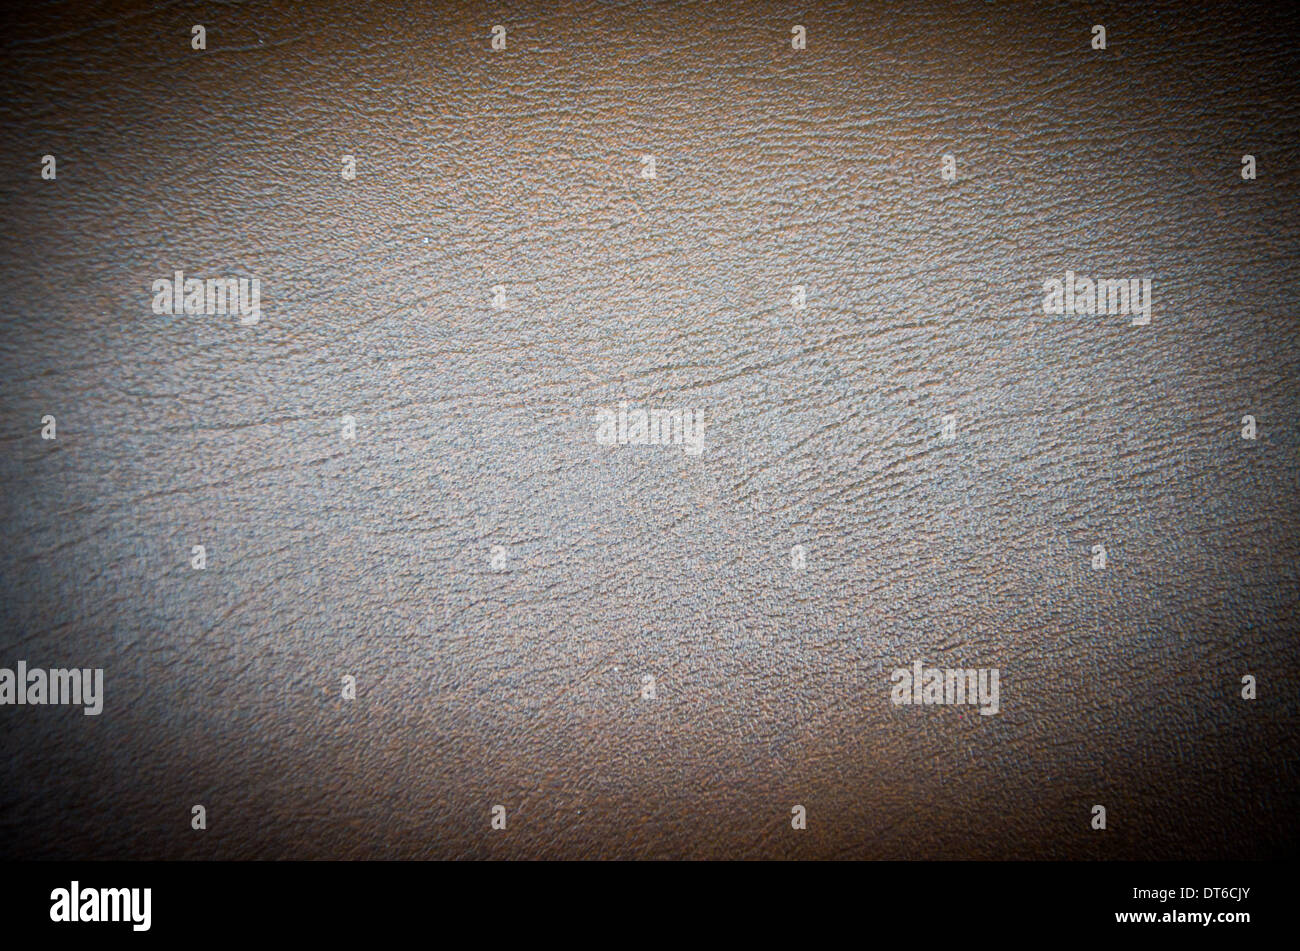 old brown leather texture background Stock Photo